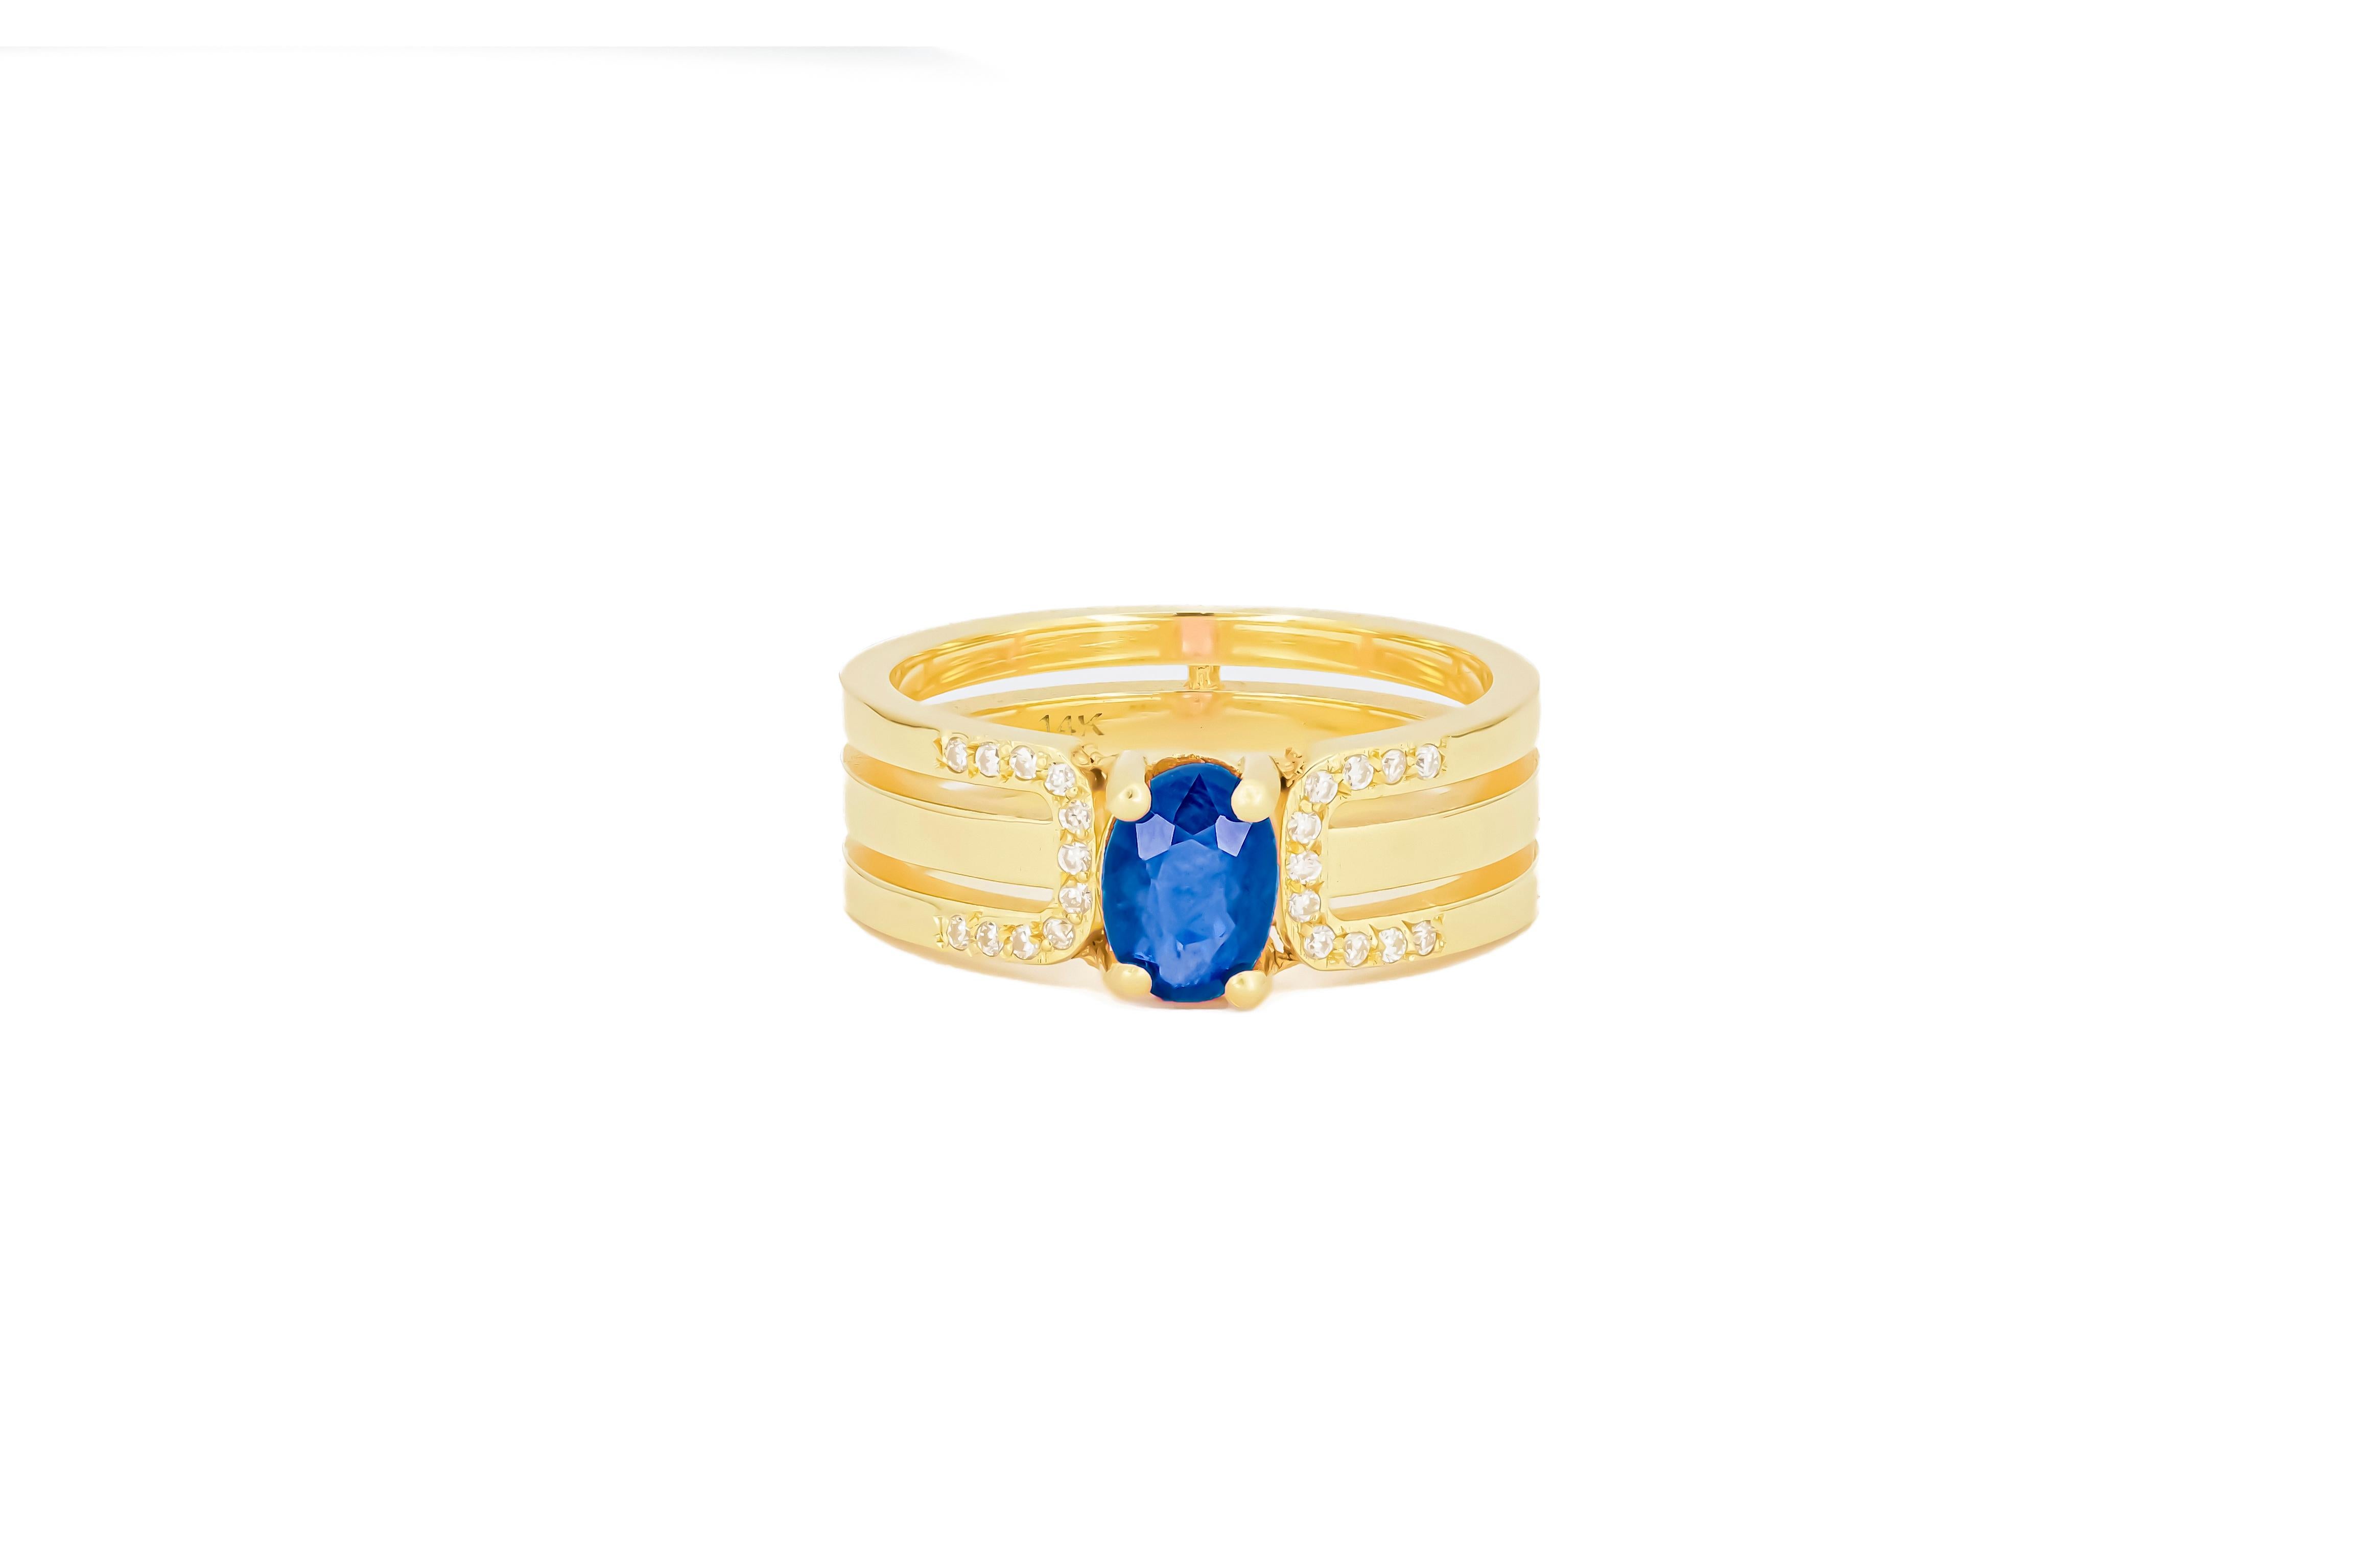 For Sale:  14 K Gold Mens Ring with Sapphire. 2